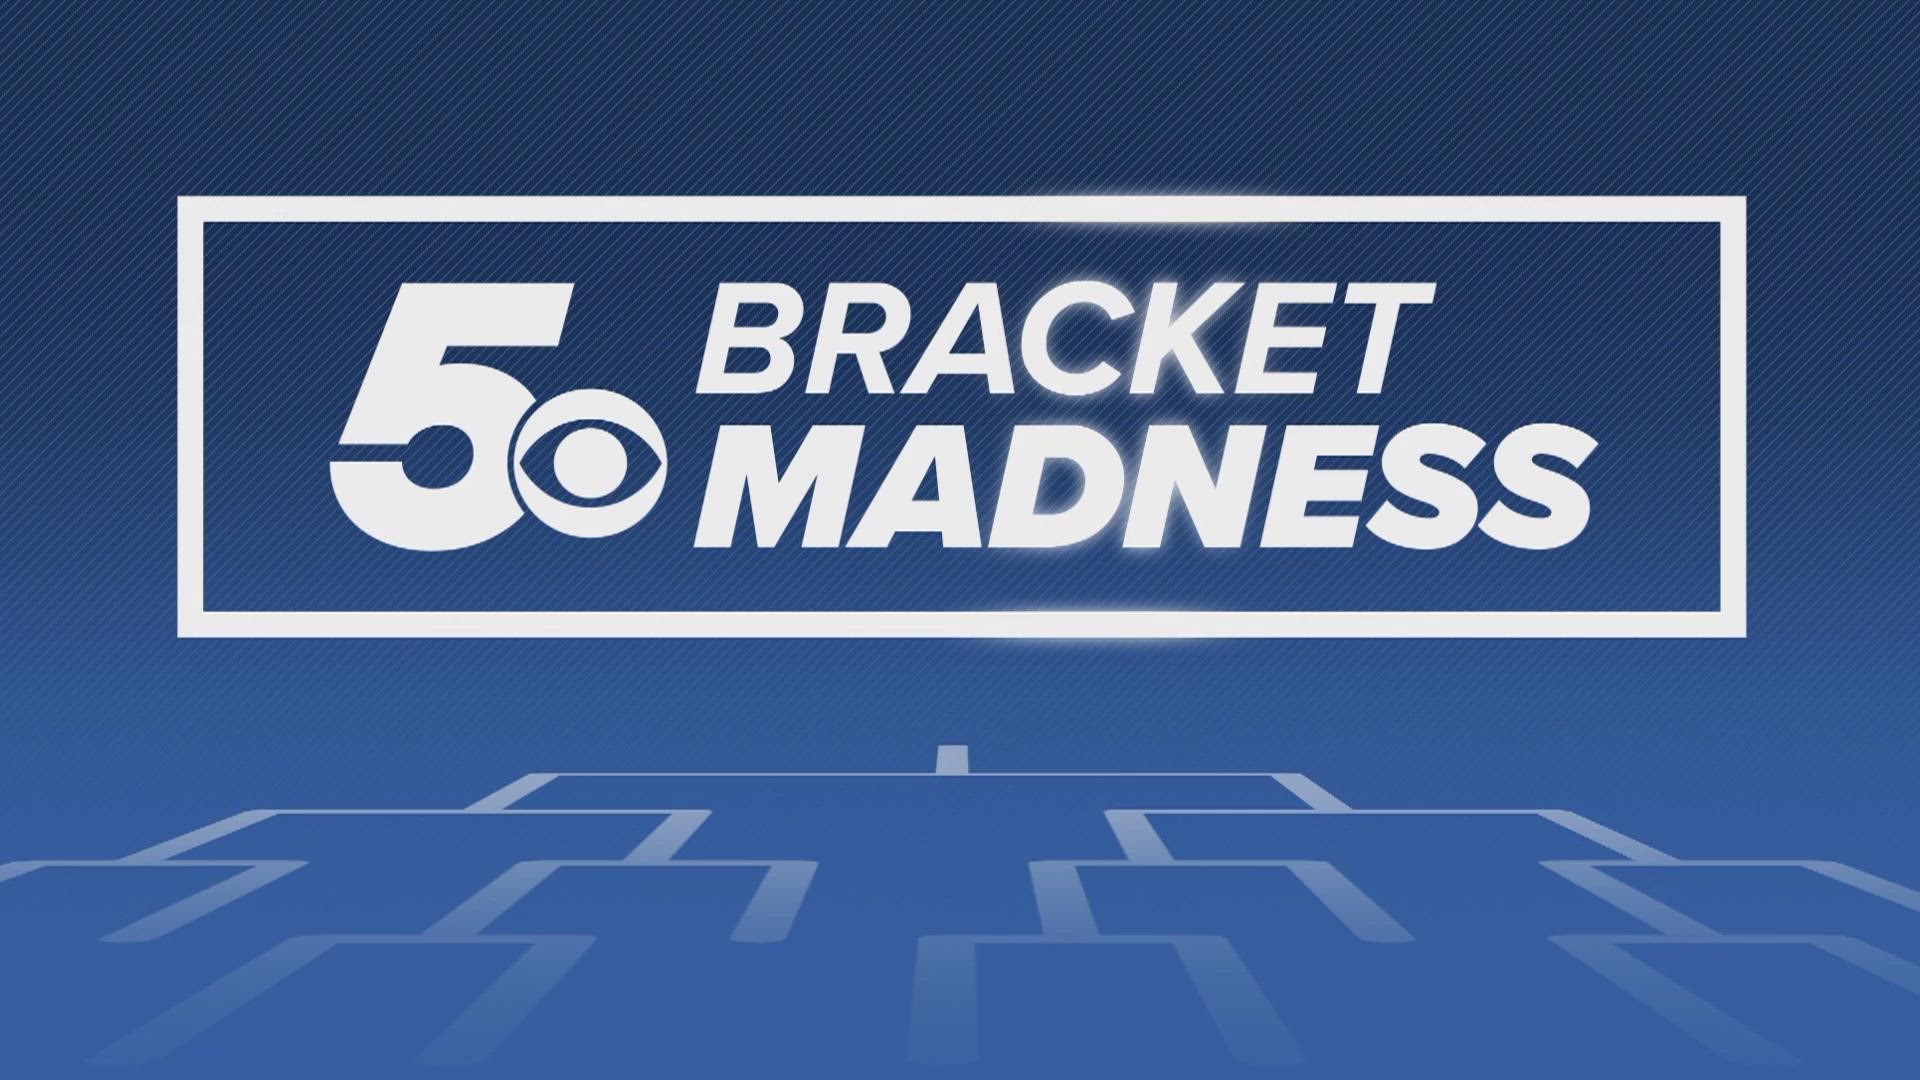 Enter your bracket for a chance to win $1,000 and more!